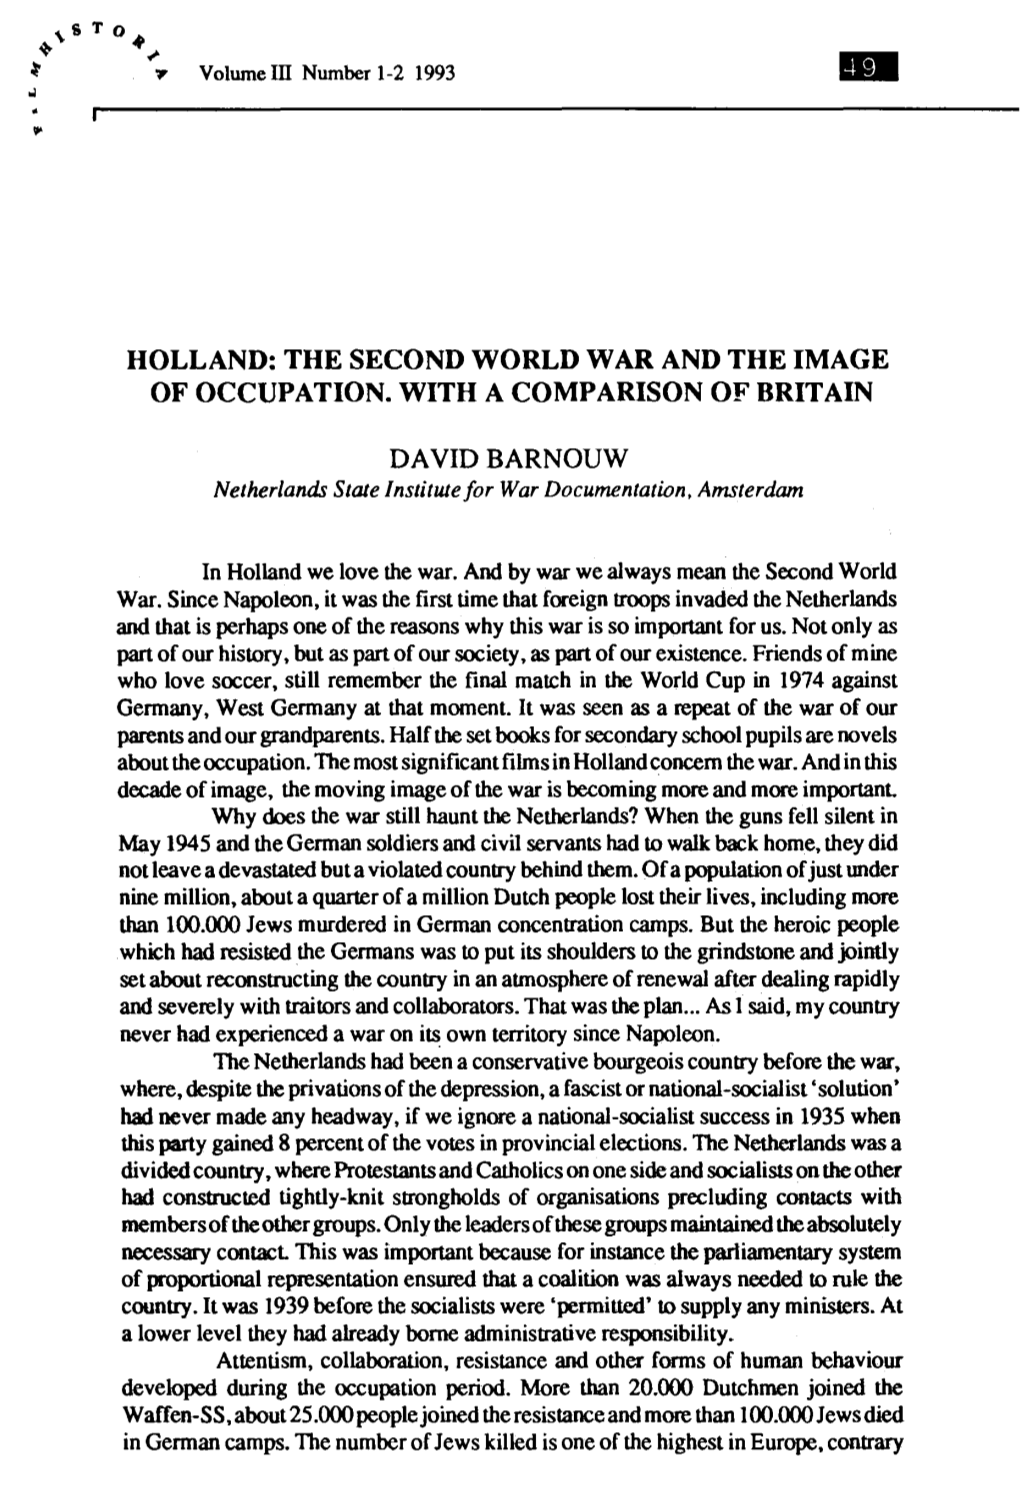 Holland: the Second World War and the Image of Occupation